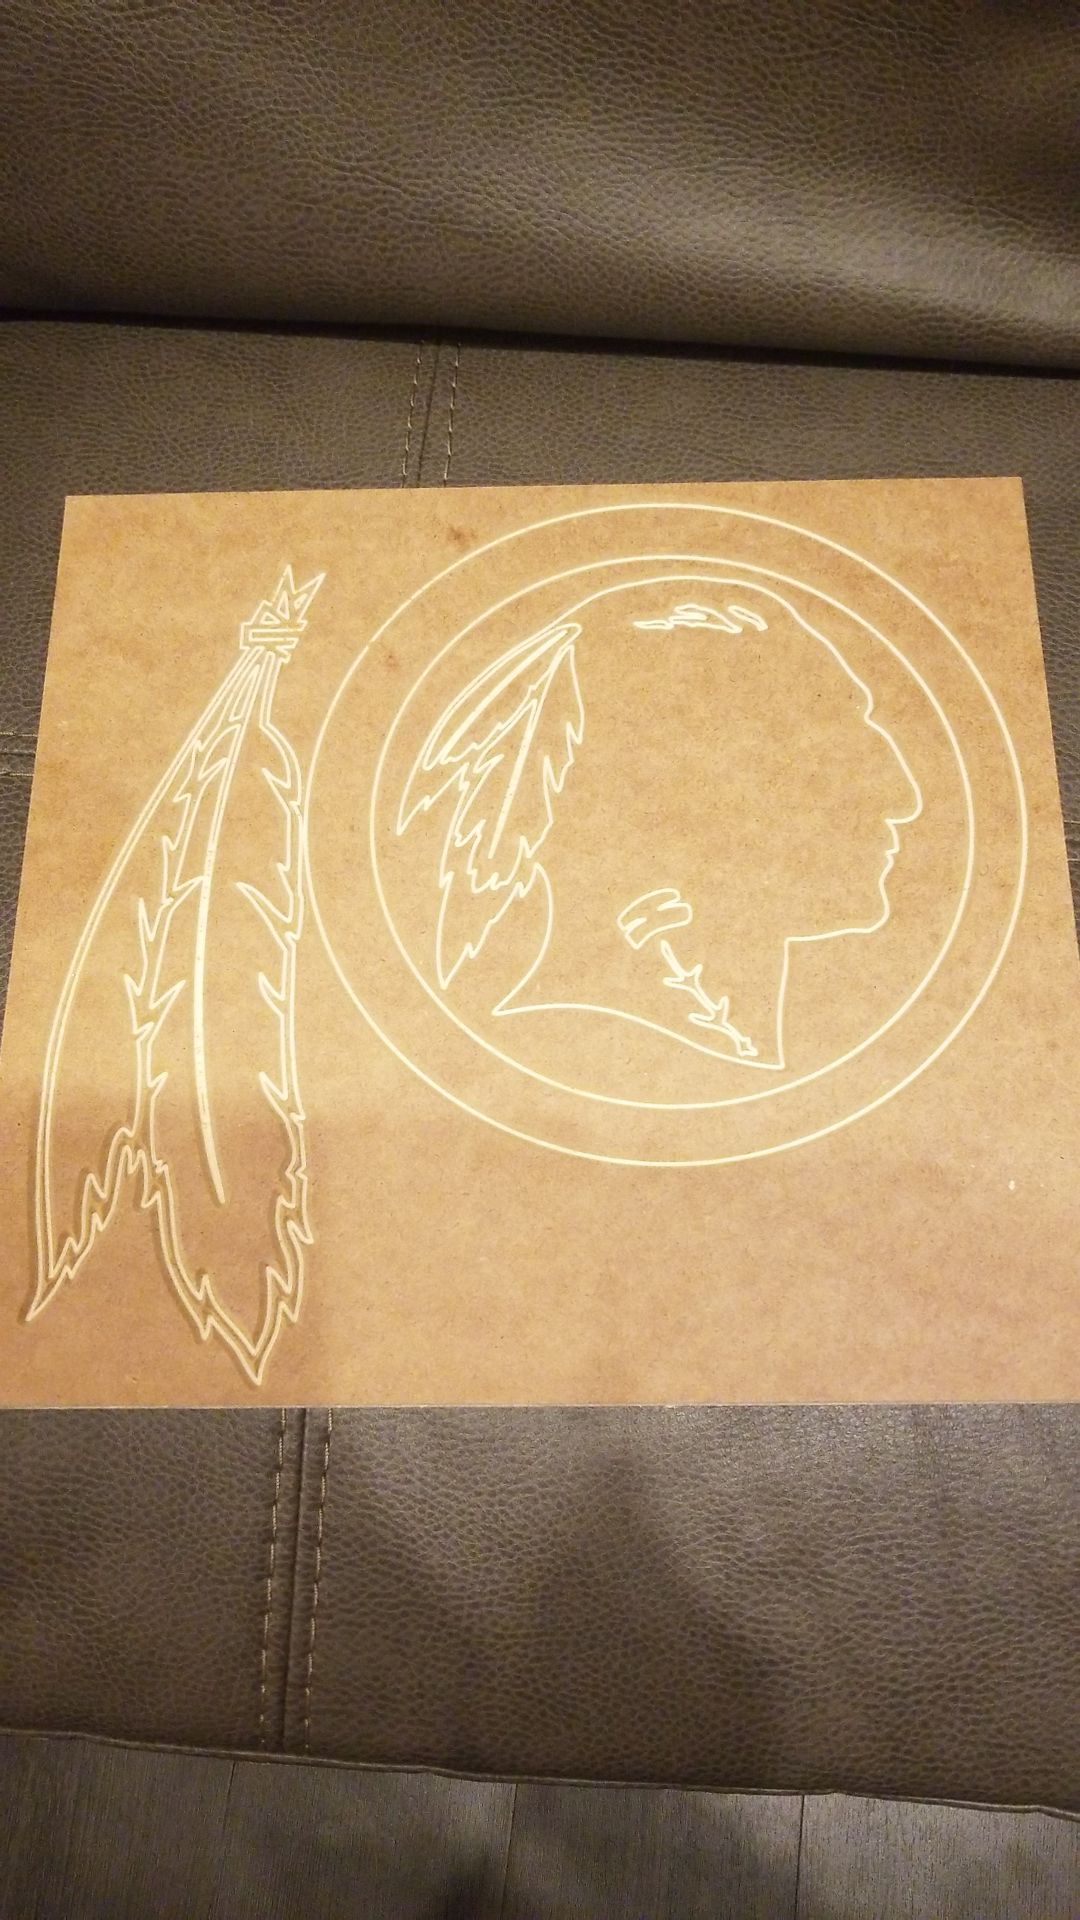 Redskins, Wizards and Captials logo. Made on a cnc router.